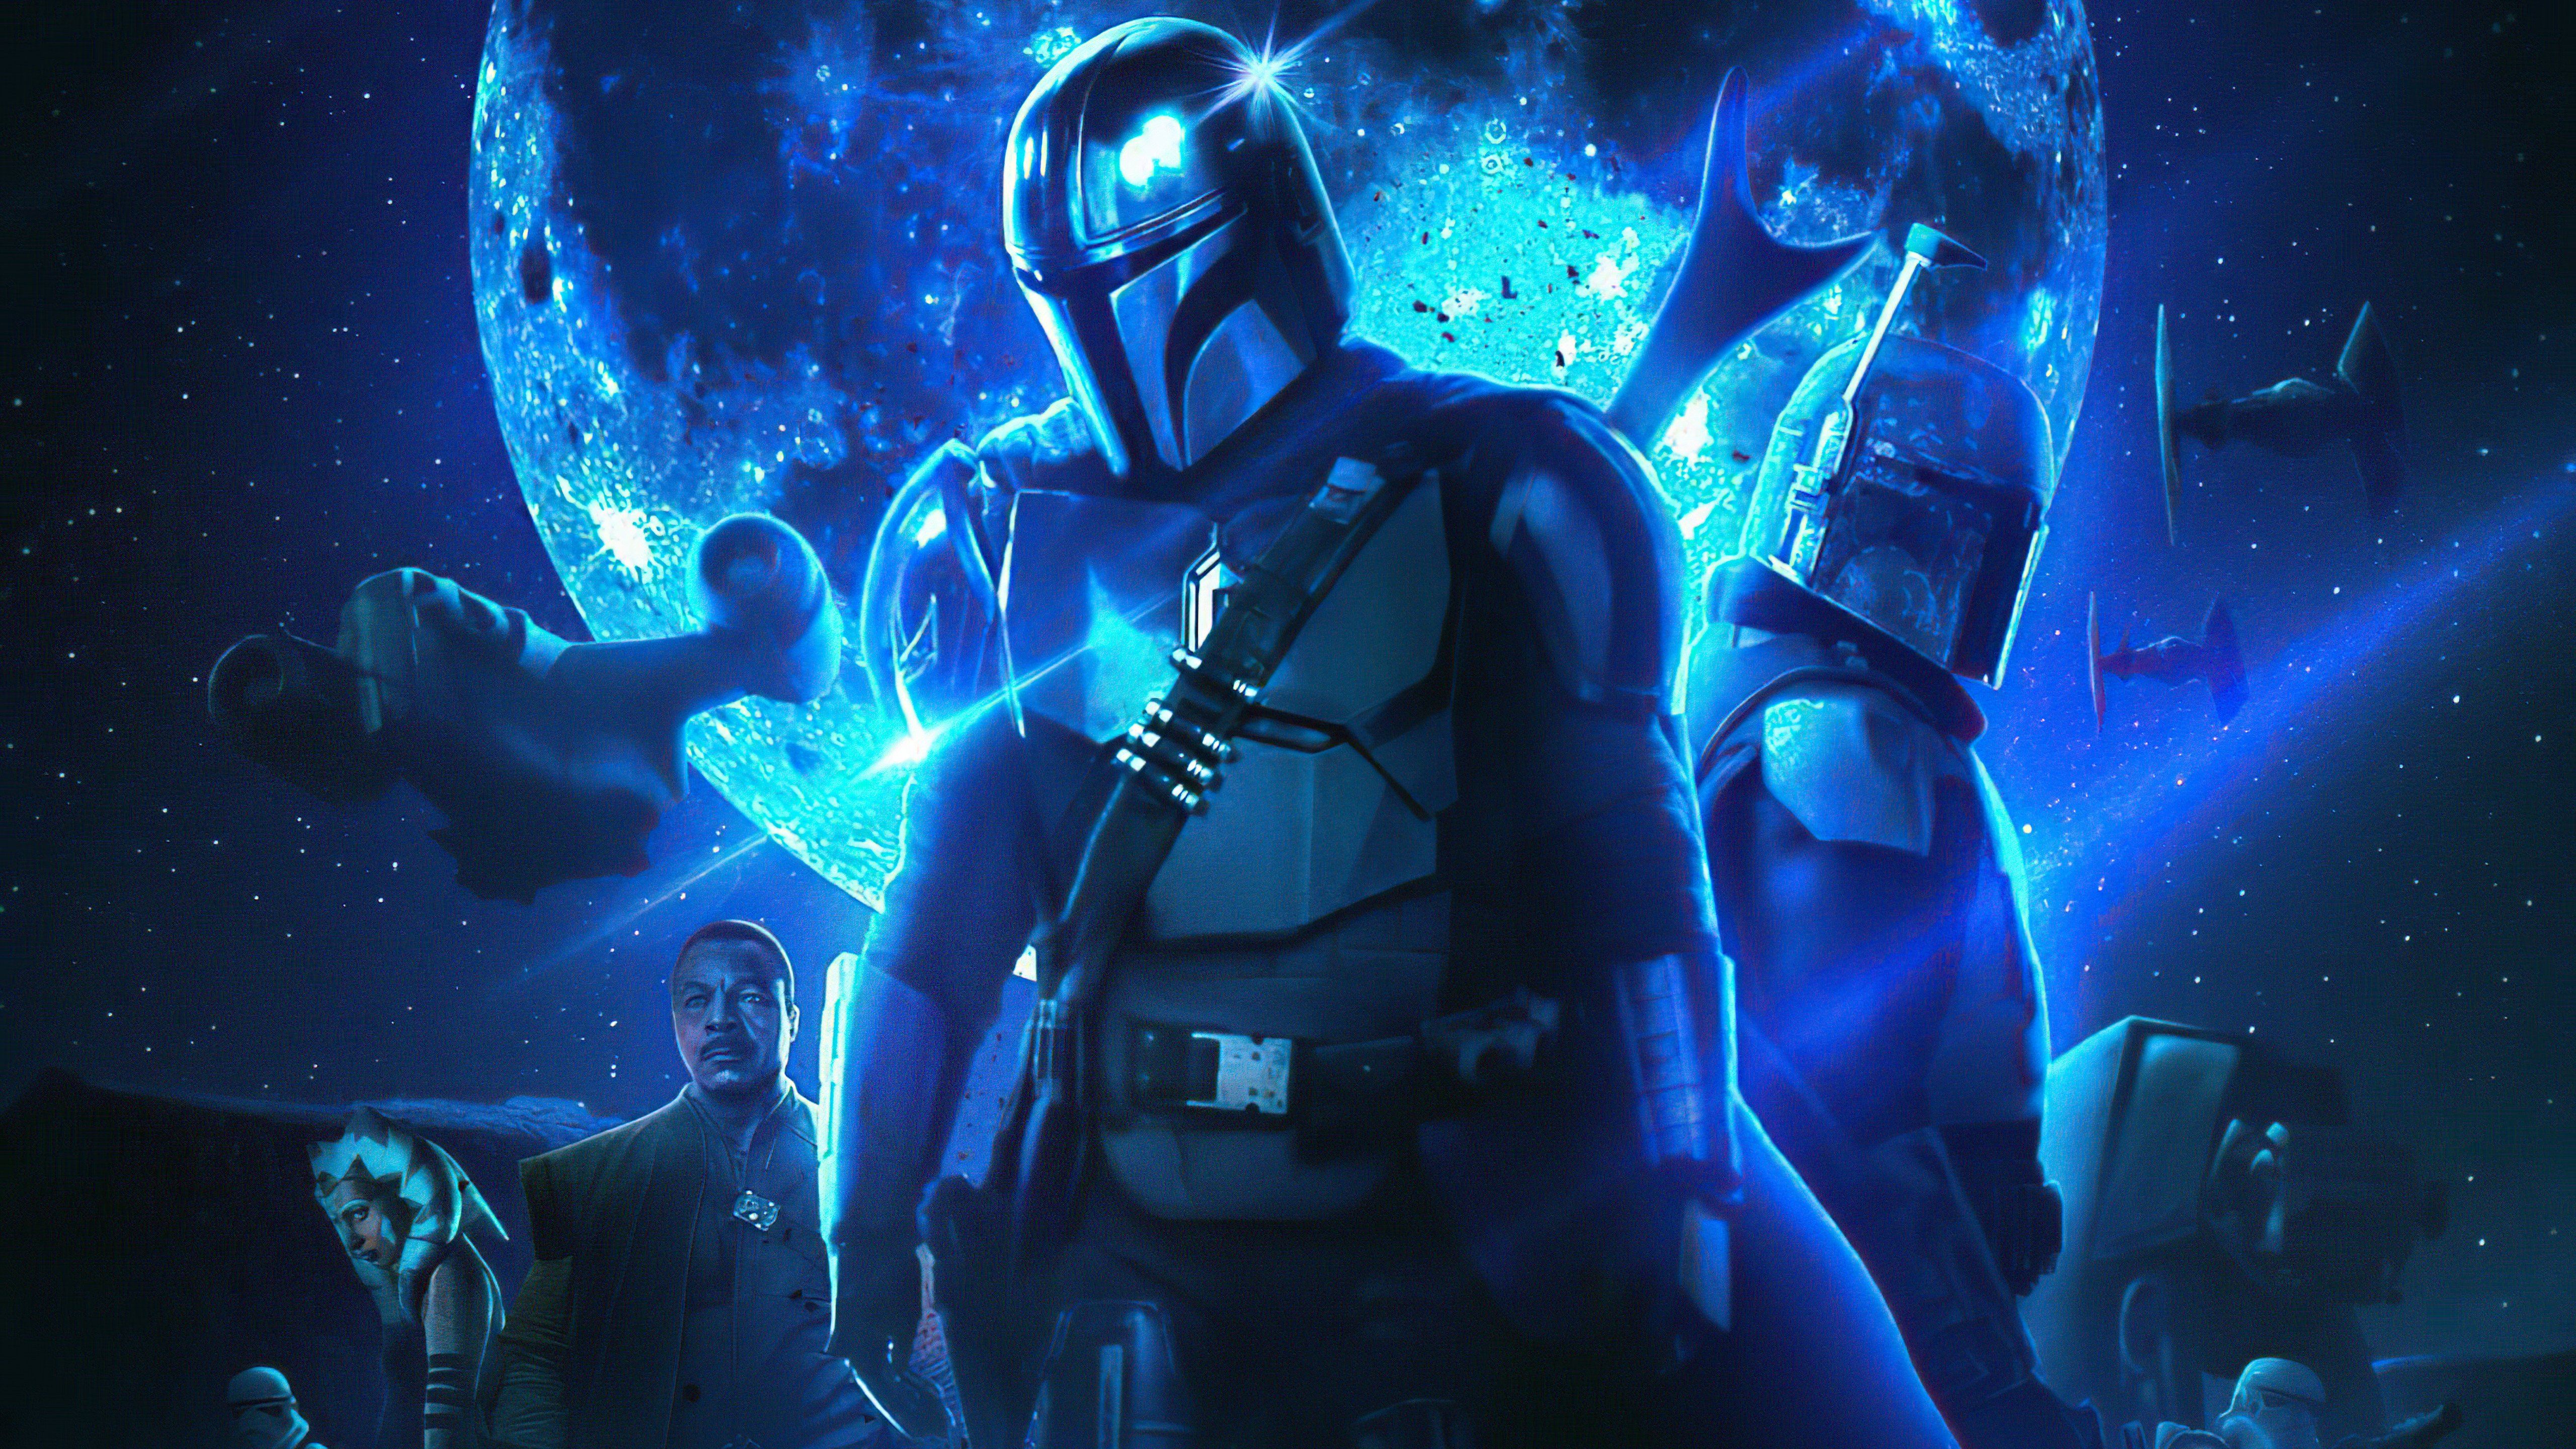 The mandalorian star wars season hd tv shows k wallpapers images backgrounds photos and pictures